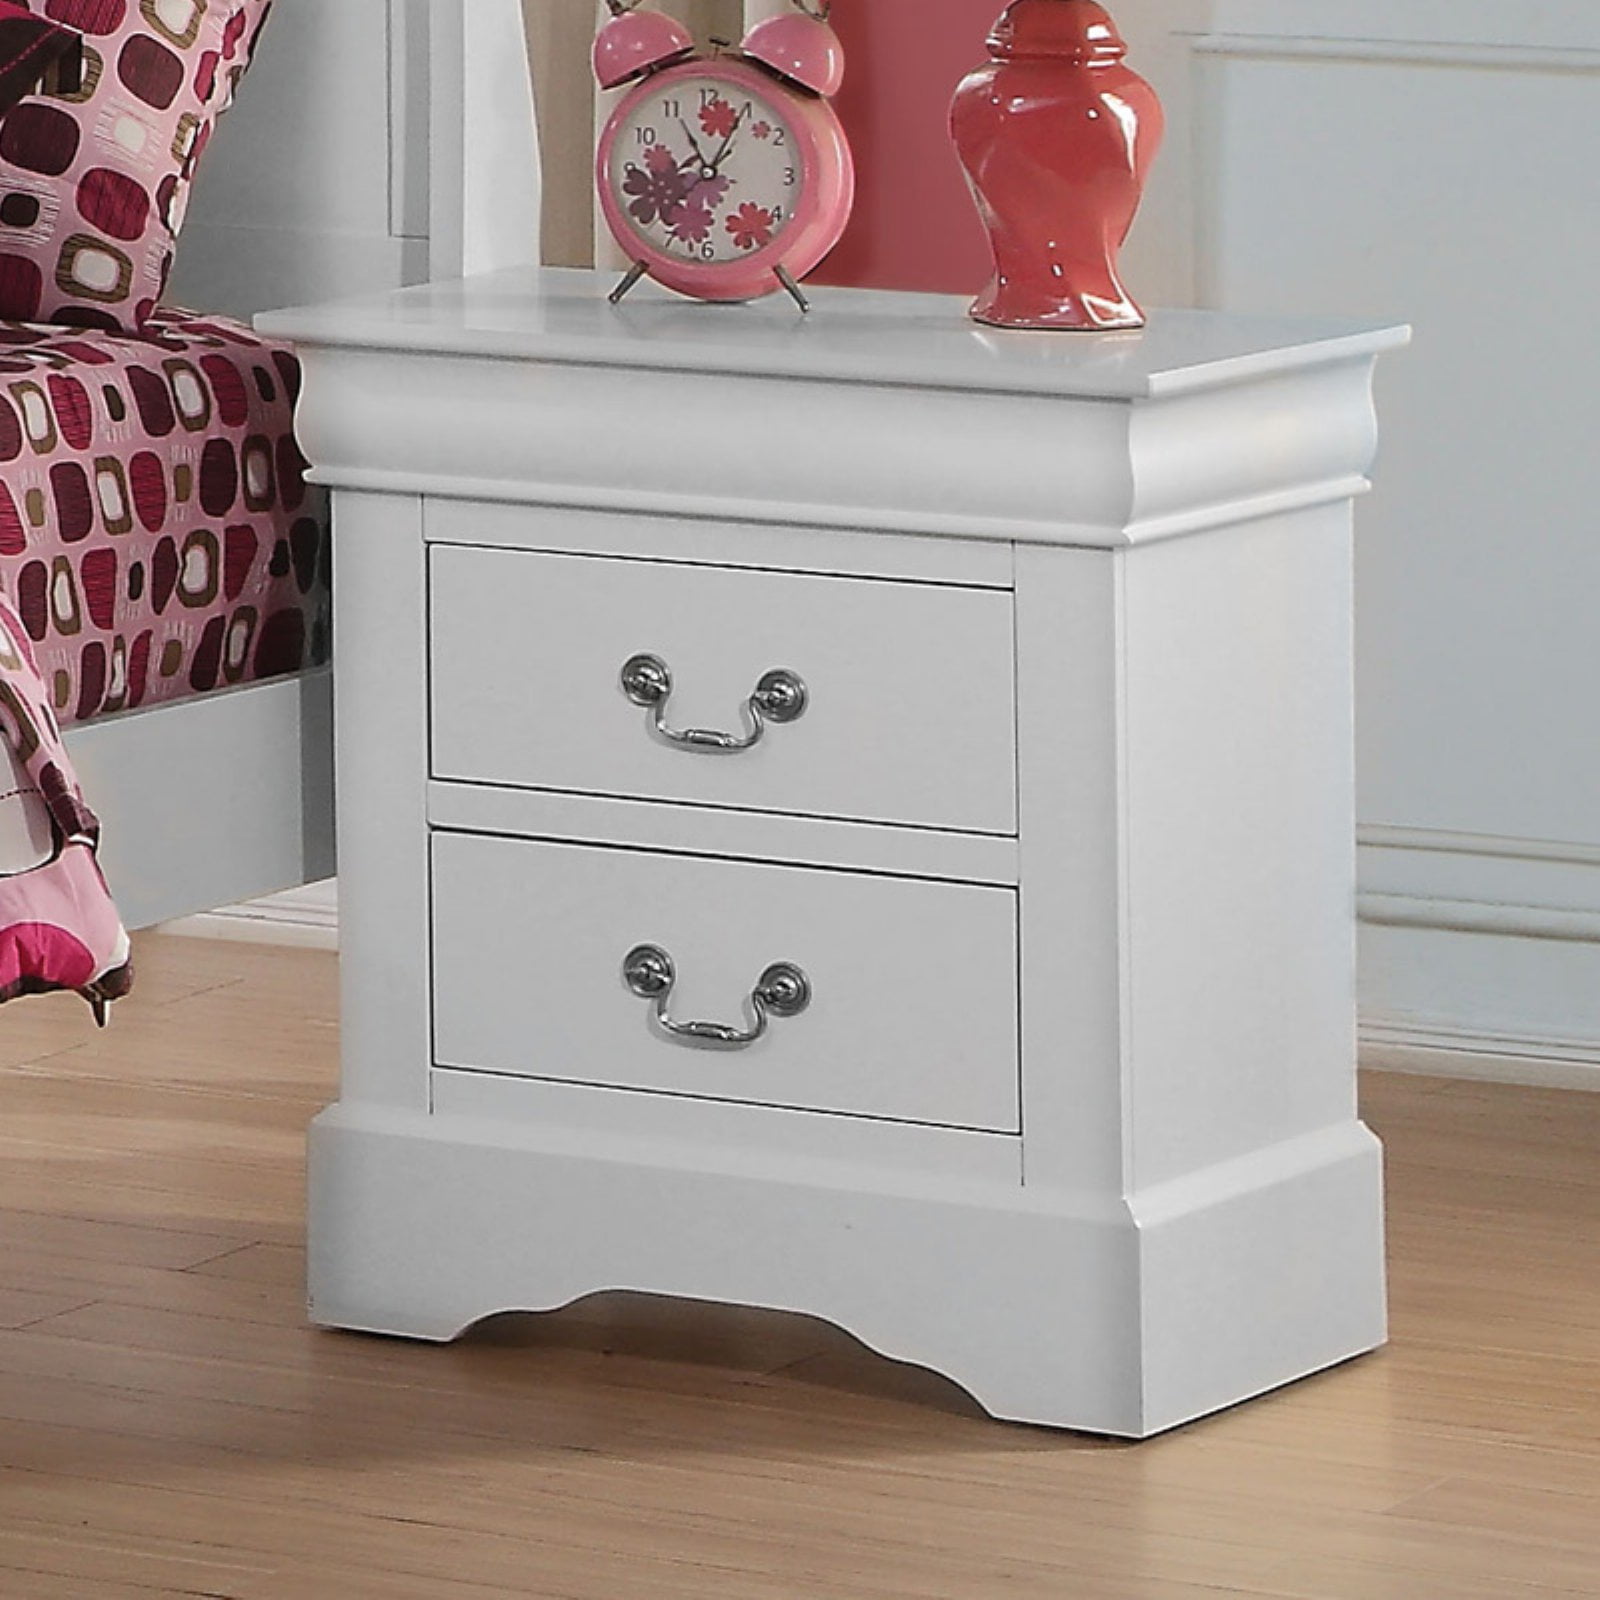 Picture of ACME 24503 Louis Philippe III Nightstand, White - 24 x 22 x 16 in.